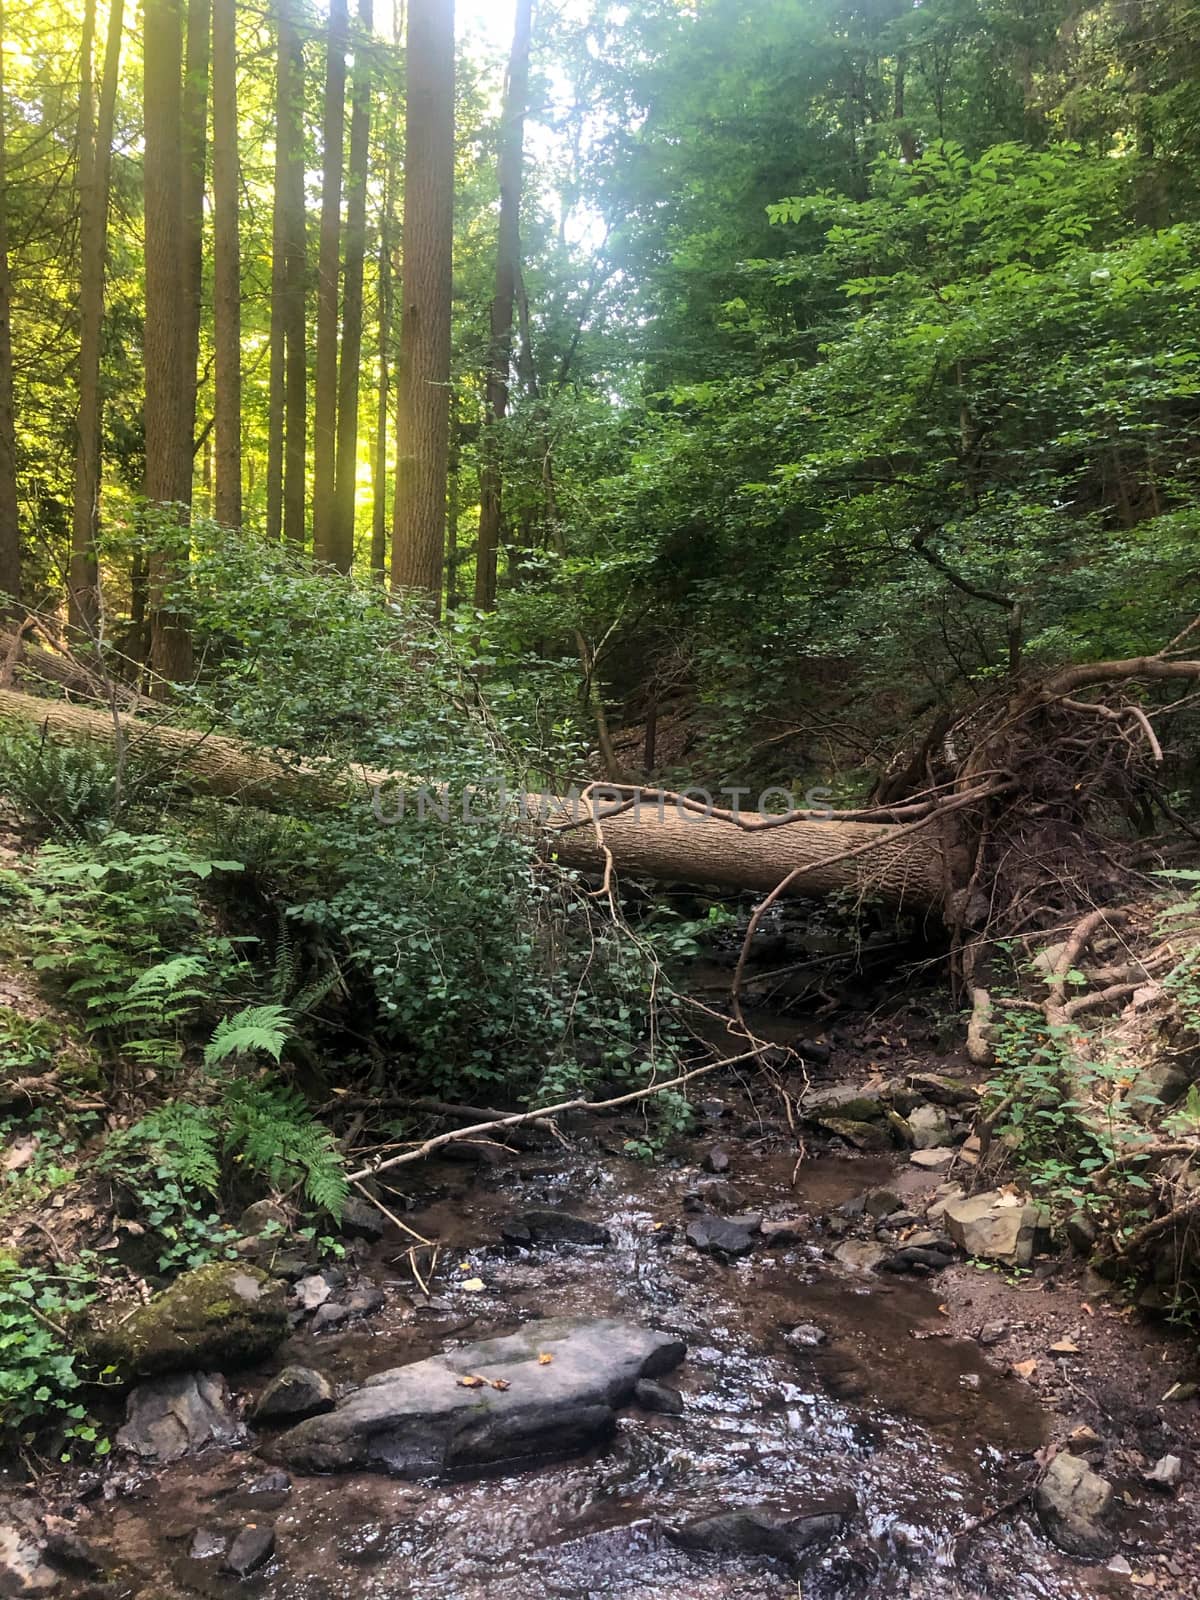 Beautiful nature image in golden hour sunlight. A freshly fallen tree lays across a woodland stream.